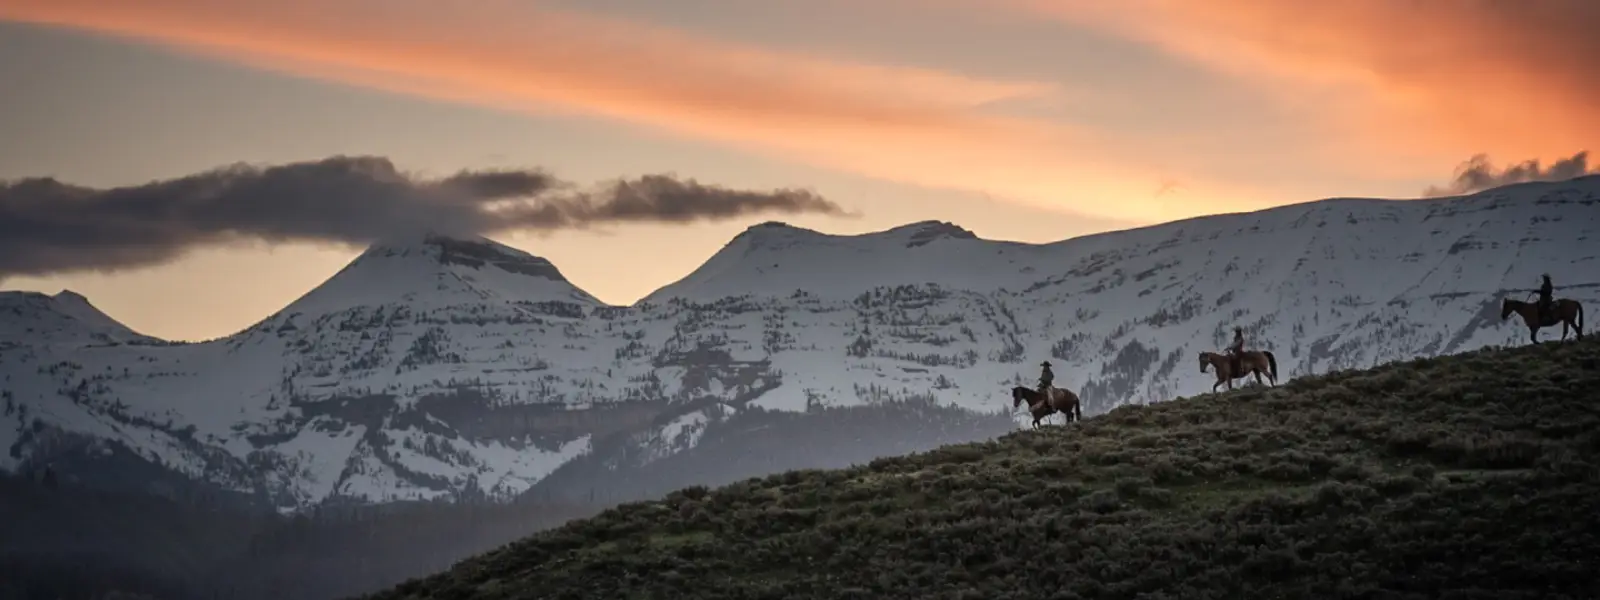 Three people on horseback riding down a hill with Wyoming mountains in the background.